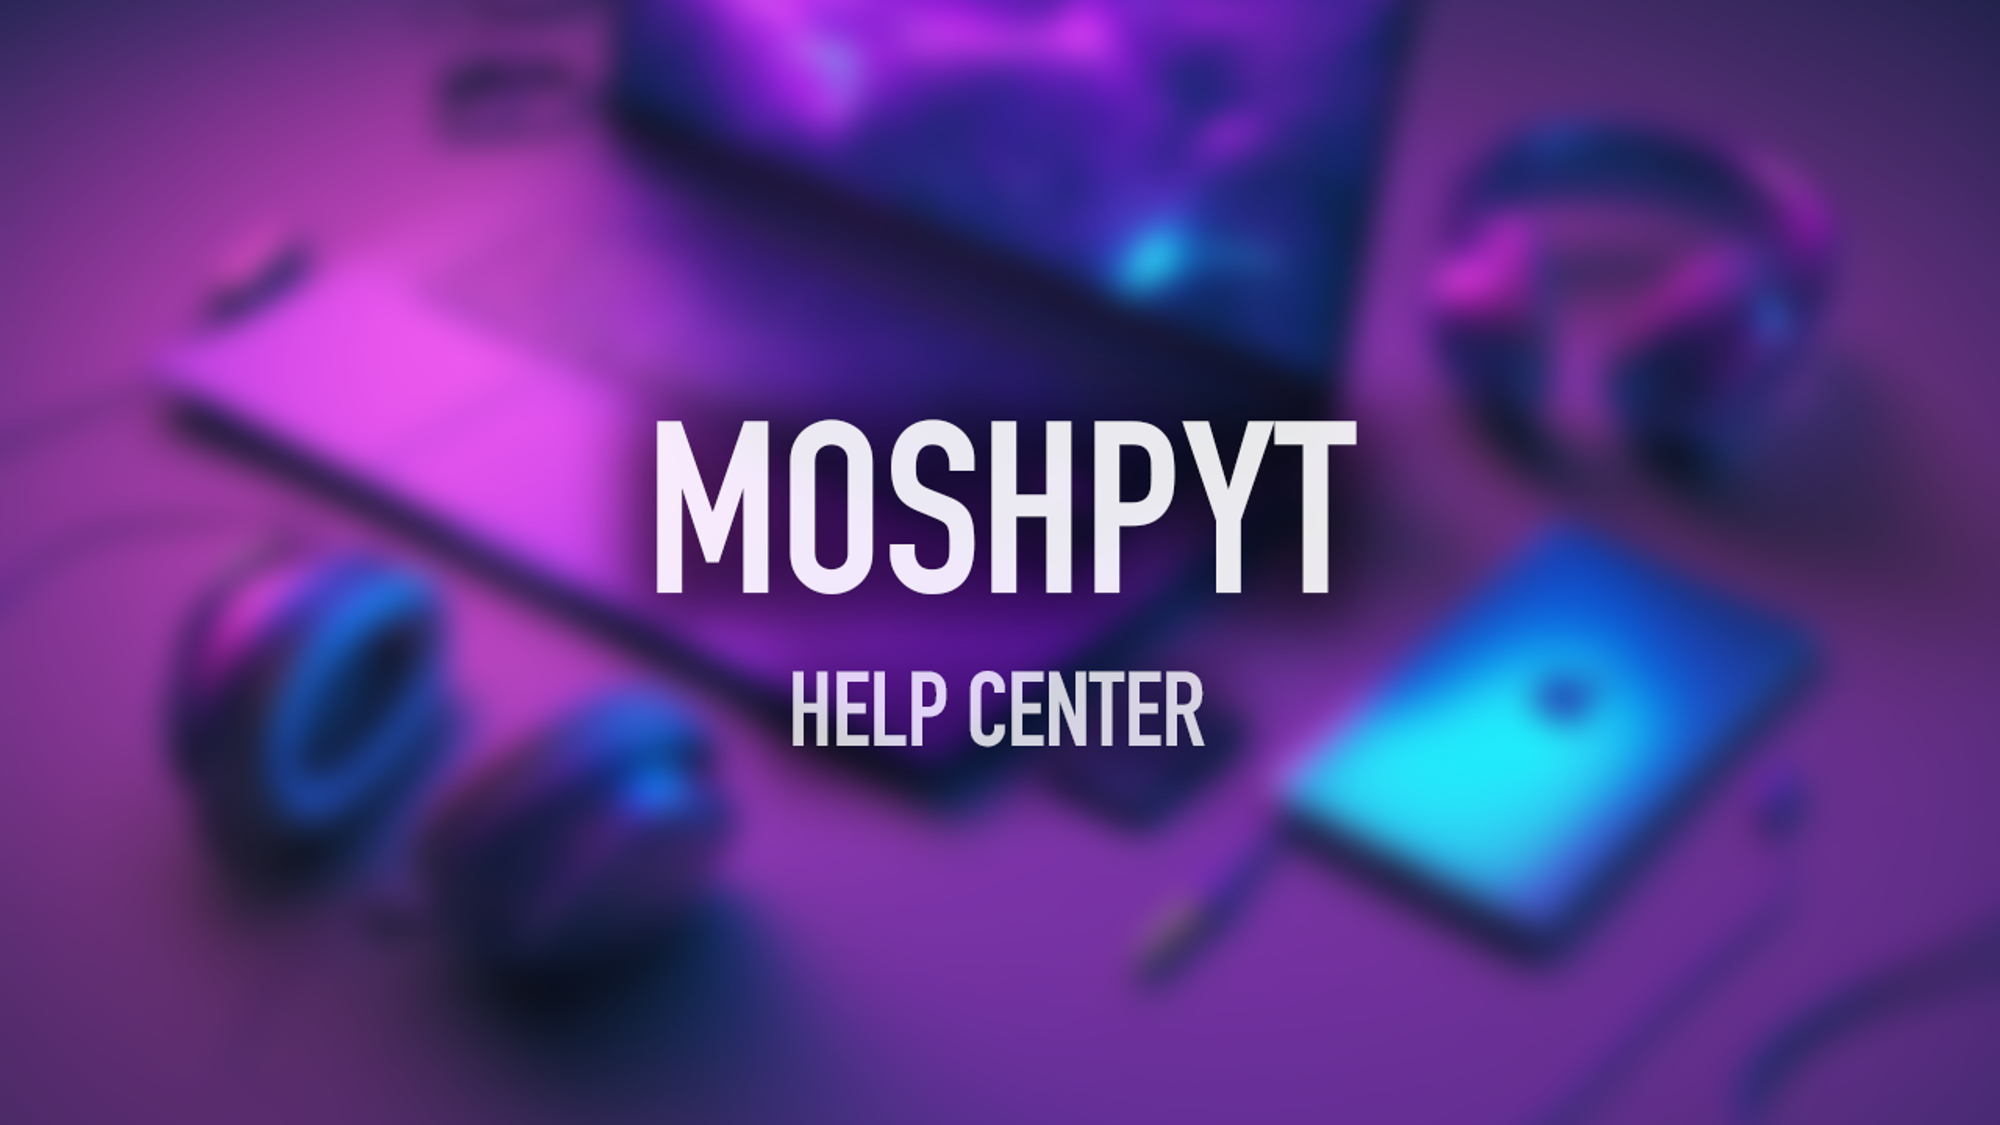 How do I Disconnect my YouTube Account from Moshpyt?